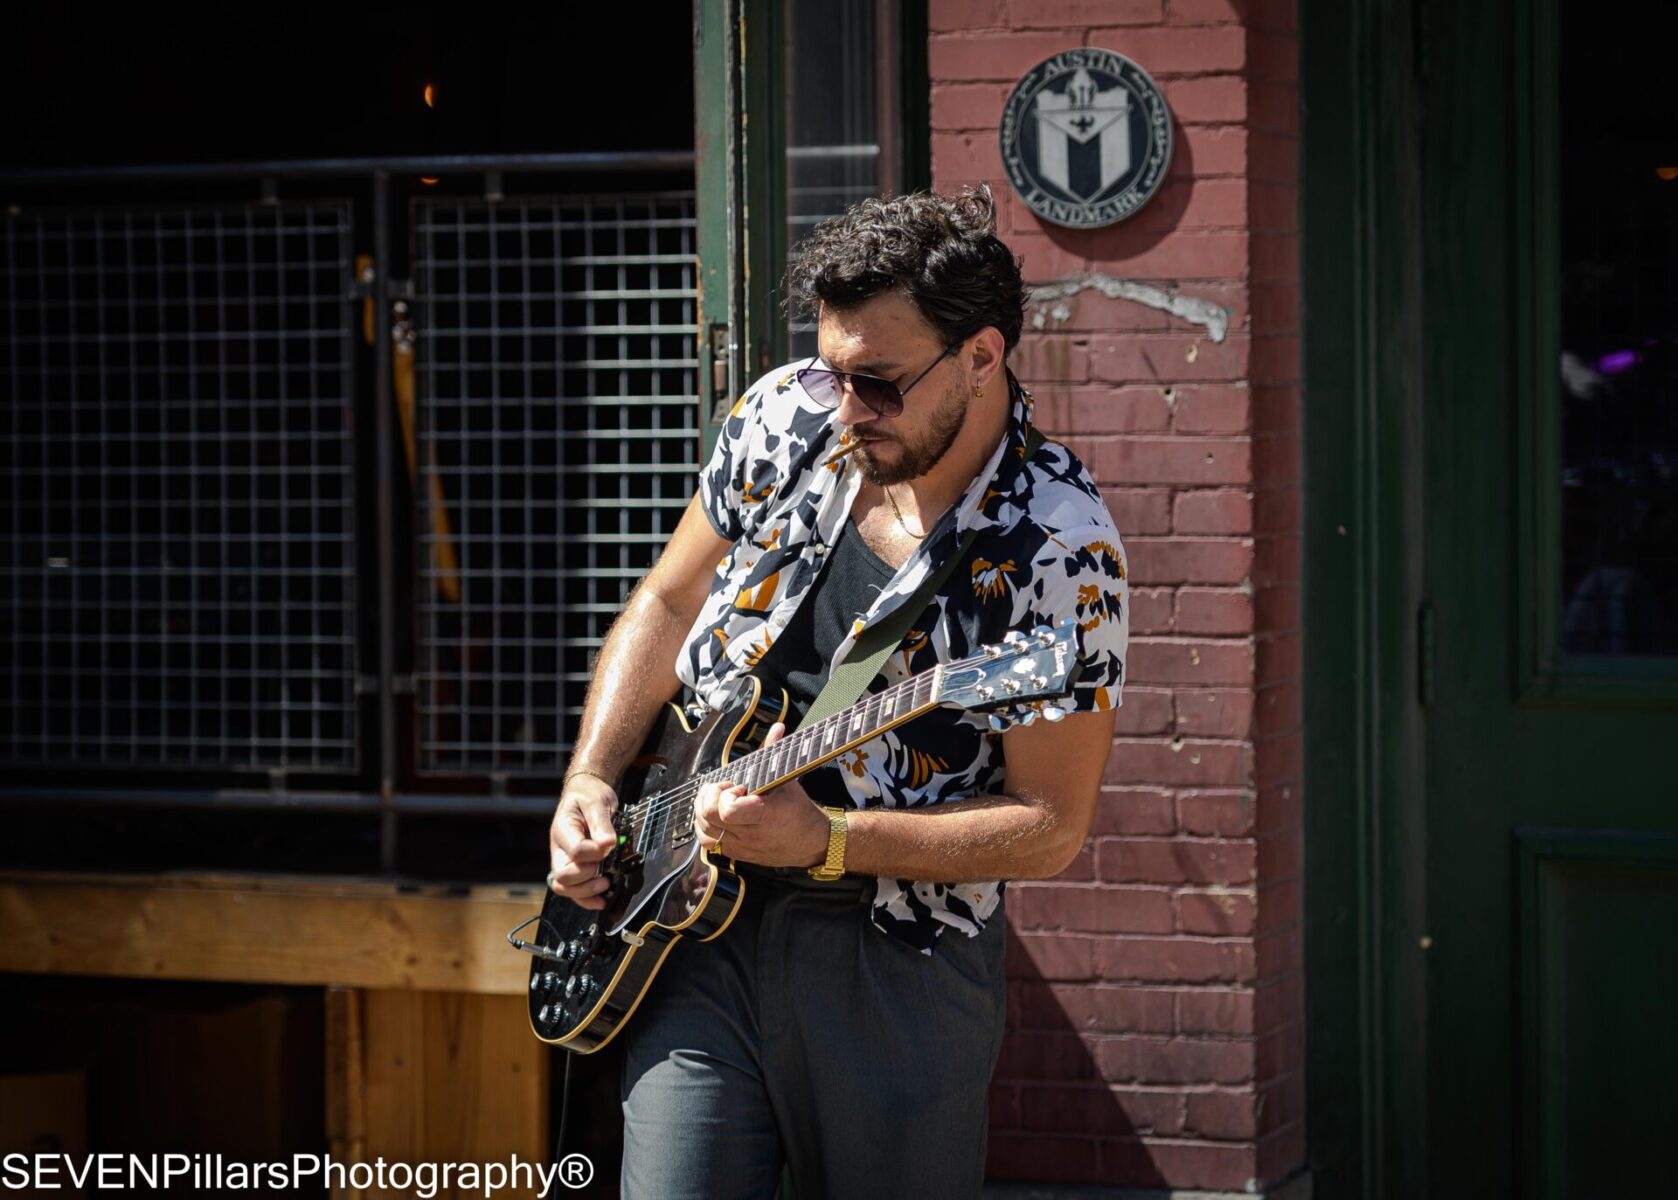 Man wearing sunglasses playing a black electric guitar in front of an establishment